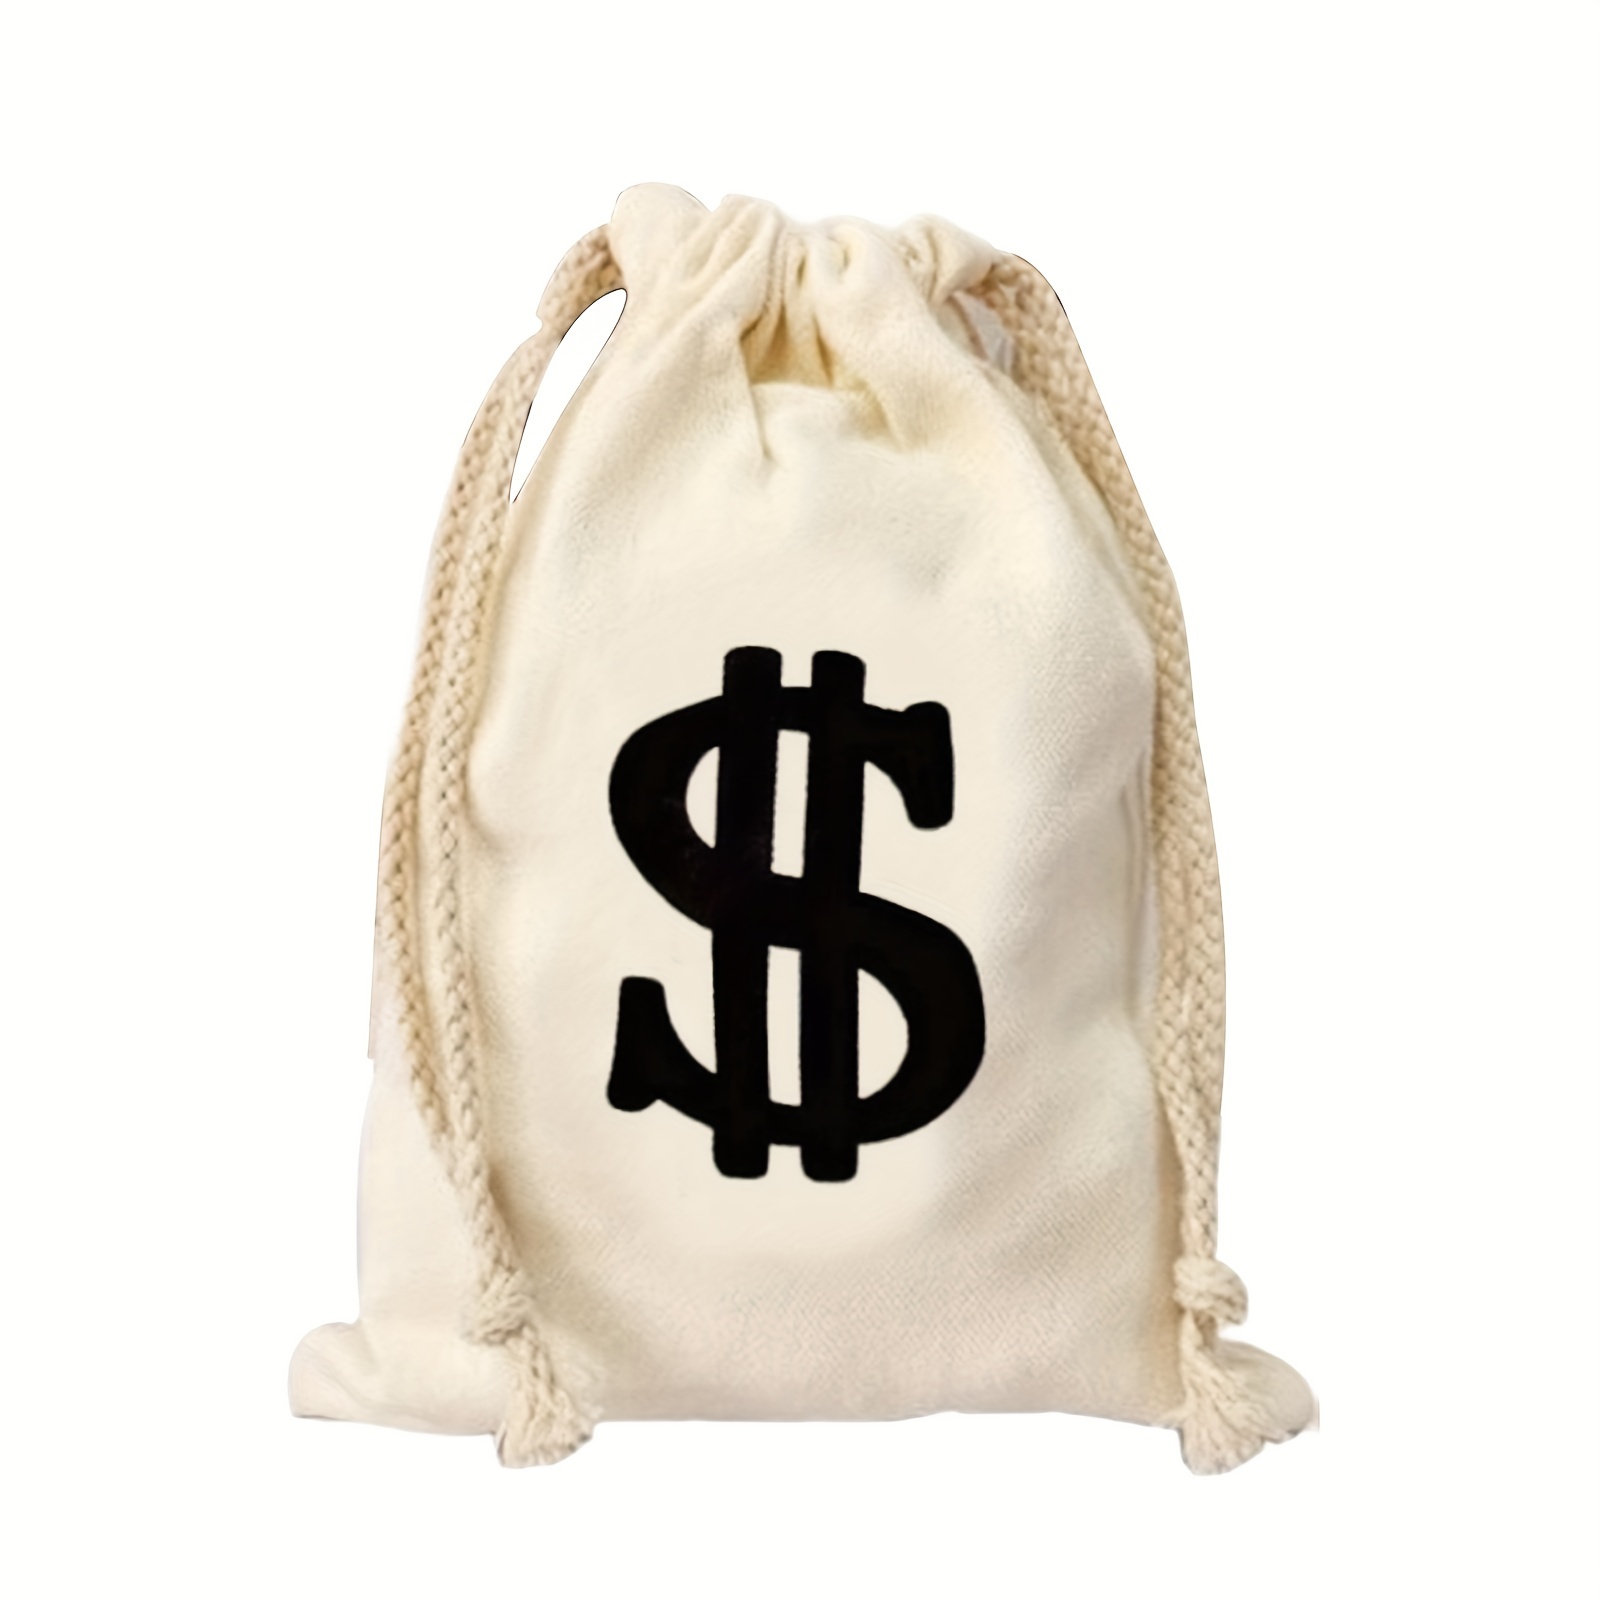 Apipi 3pcs 11.4x15.3 Inches Large Canvas Money Bags for Party, Costume Money Bag Prop with Dollar Sign, Money Sacks for Halloween Bank Robber Pirate